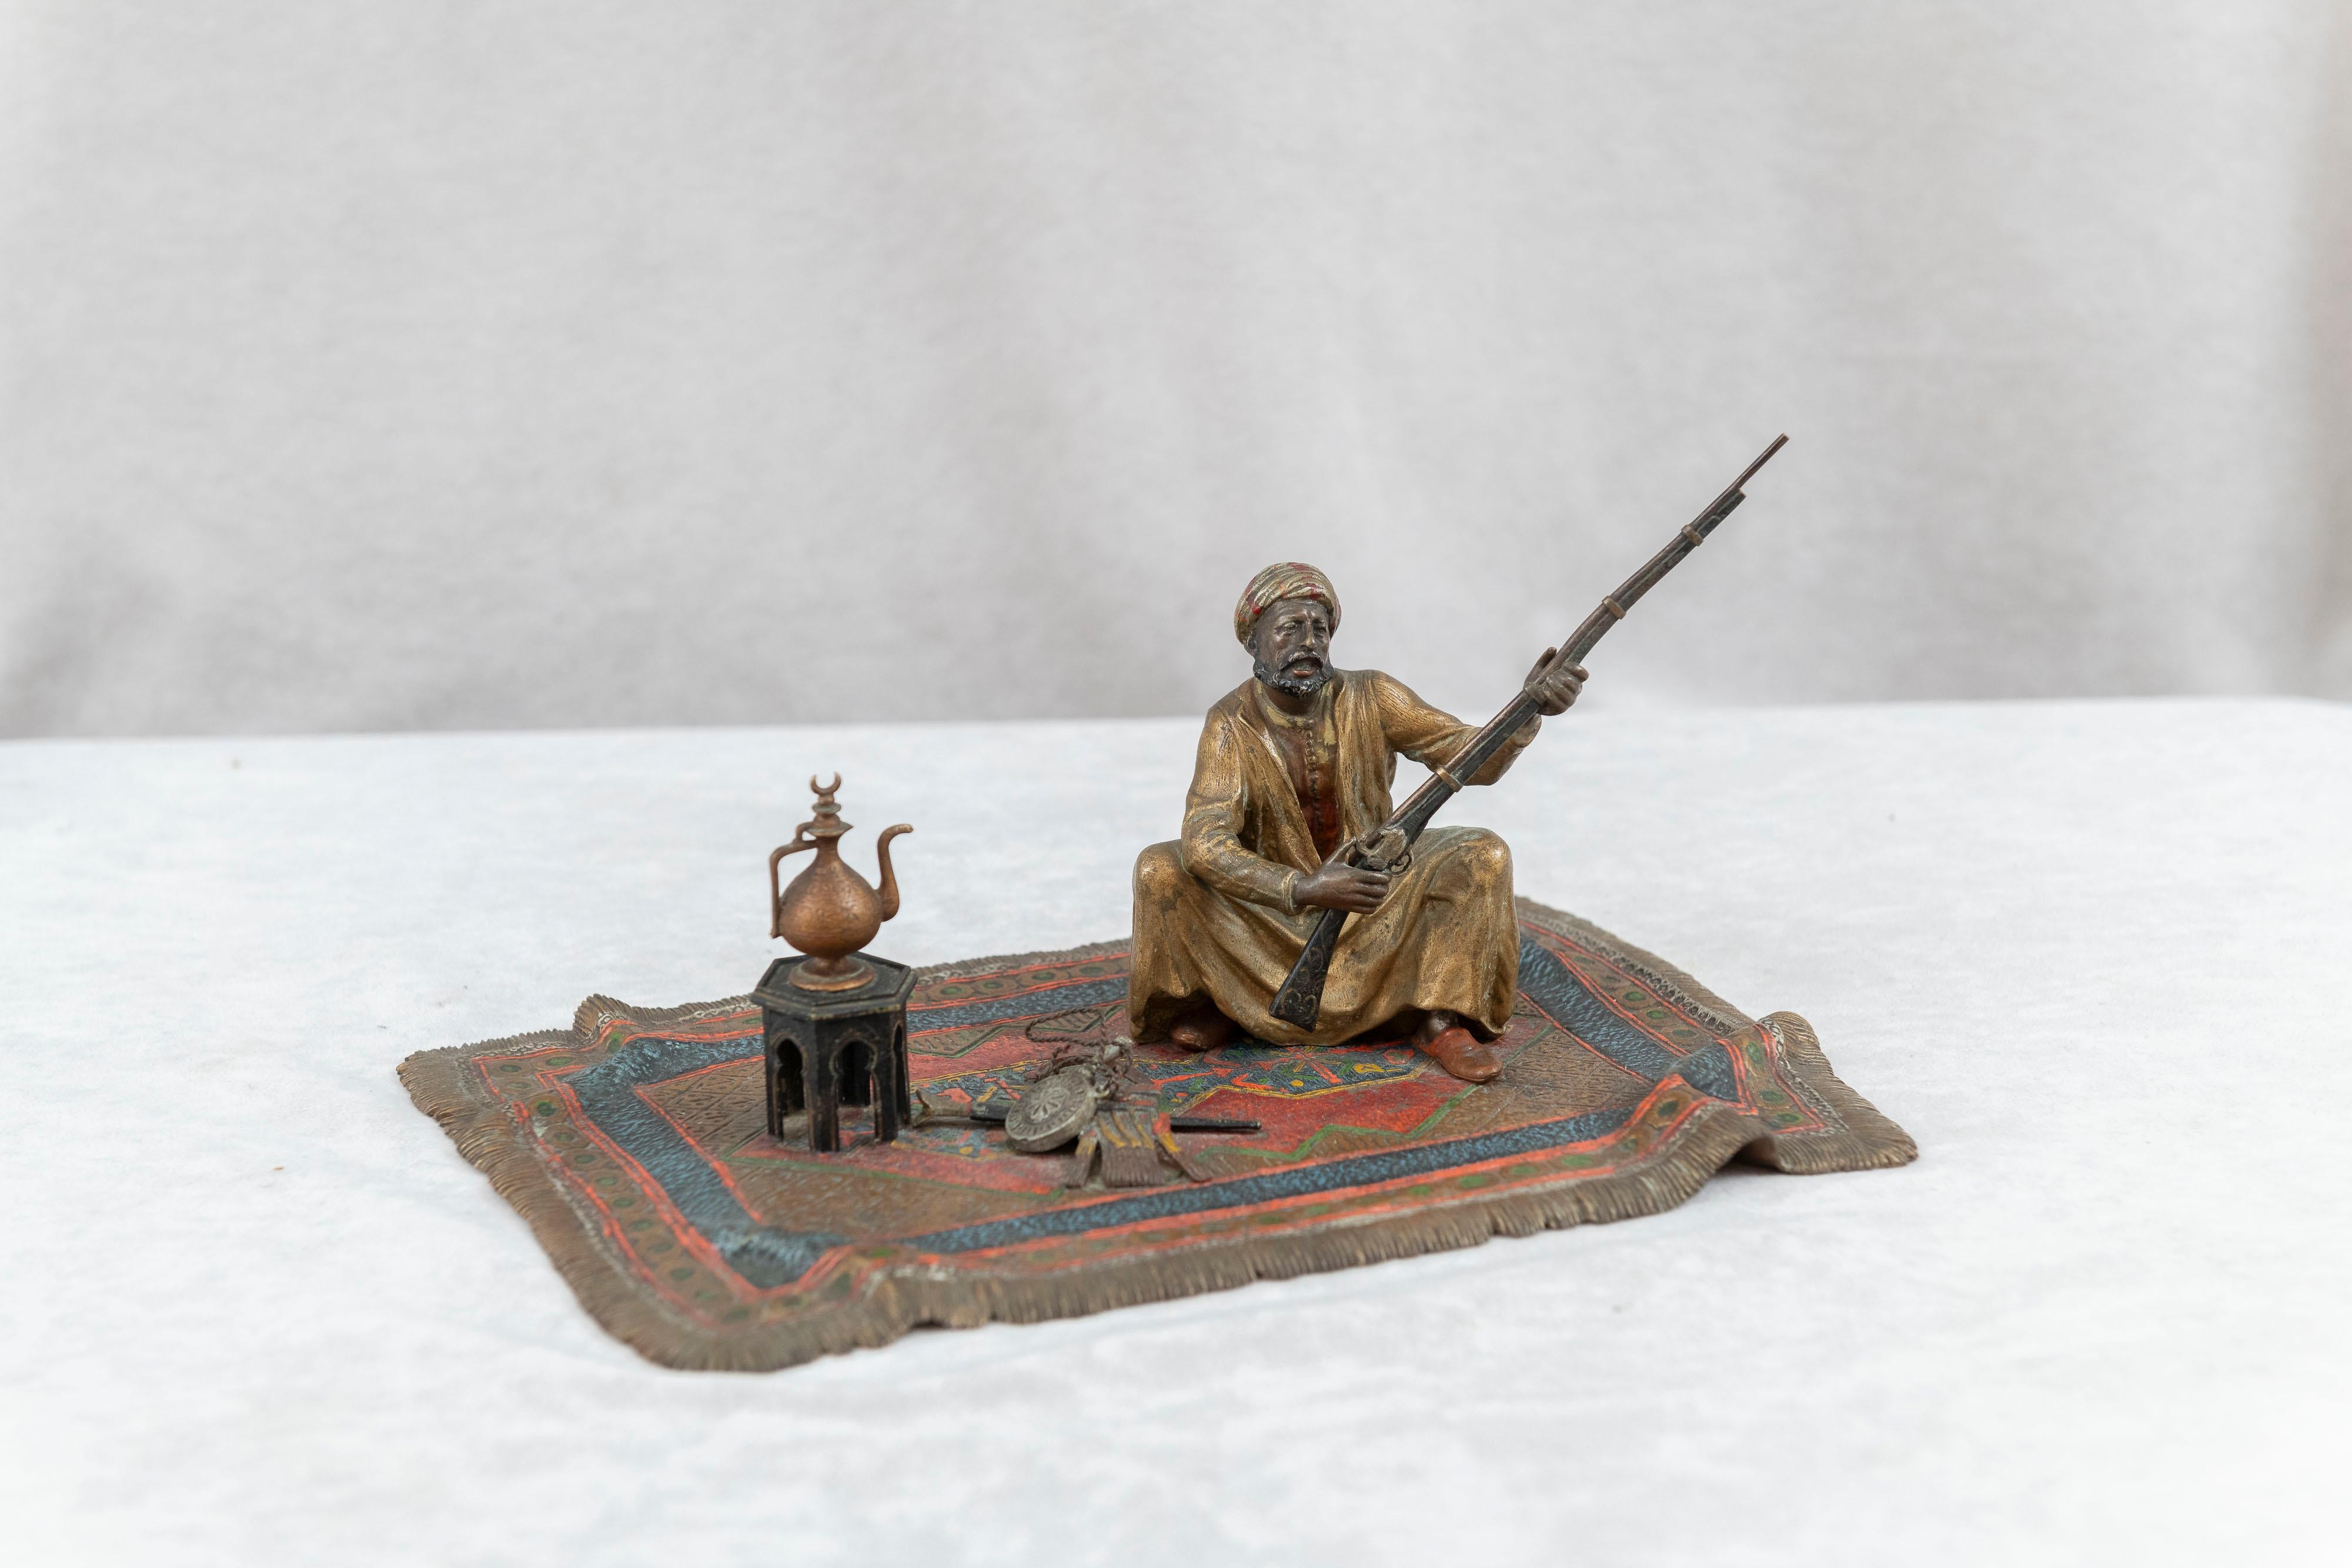  This cold painted bronze is larger than usual for this subject matter. The man sitting on a large rug and holding a rifle shows off the work of Franz Bergmann. Meticulously painted and detailed casting are what he was known for. An early example of